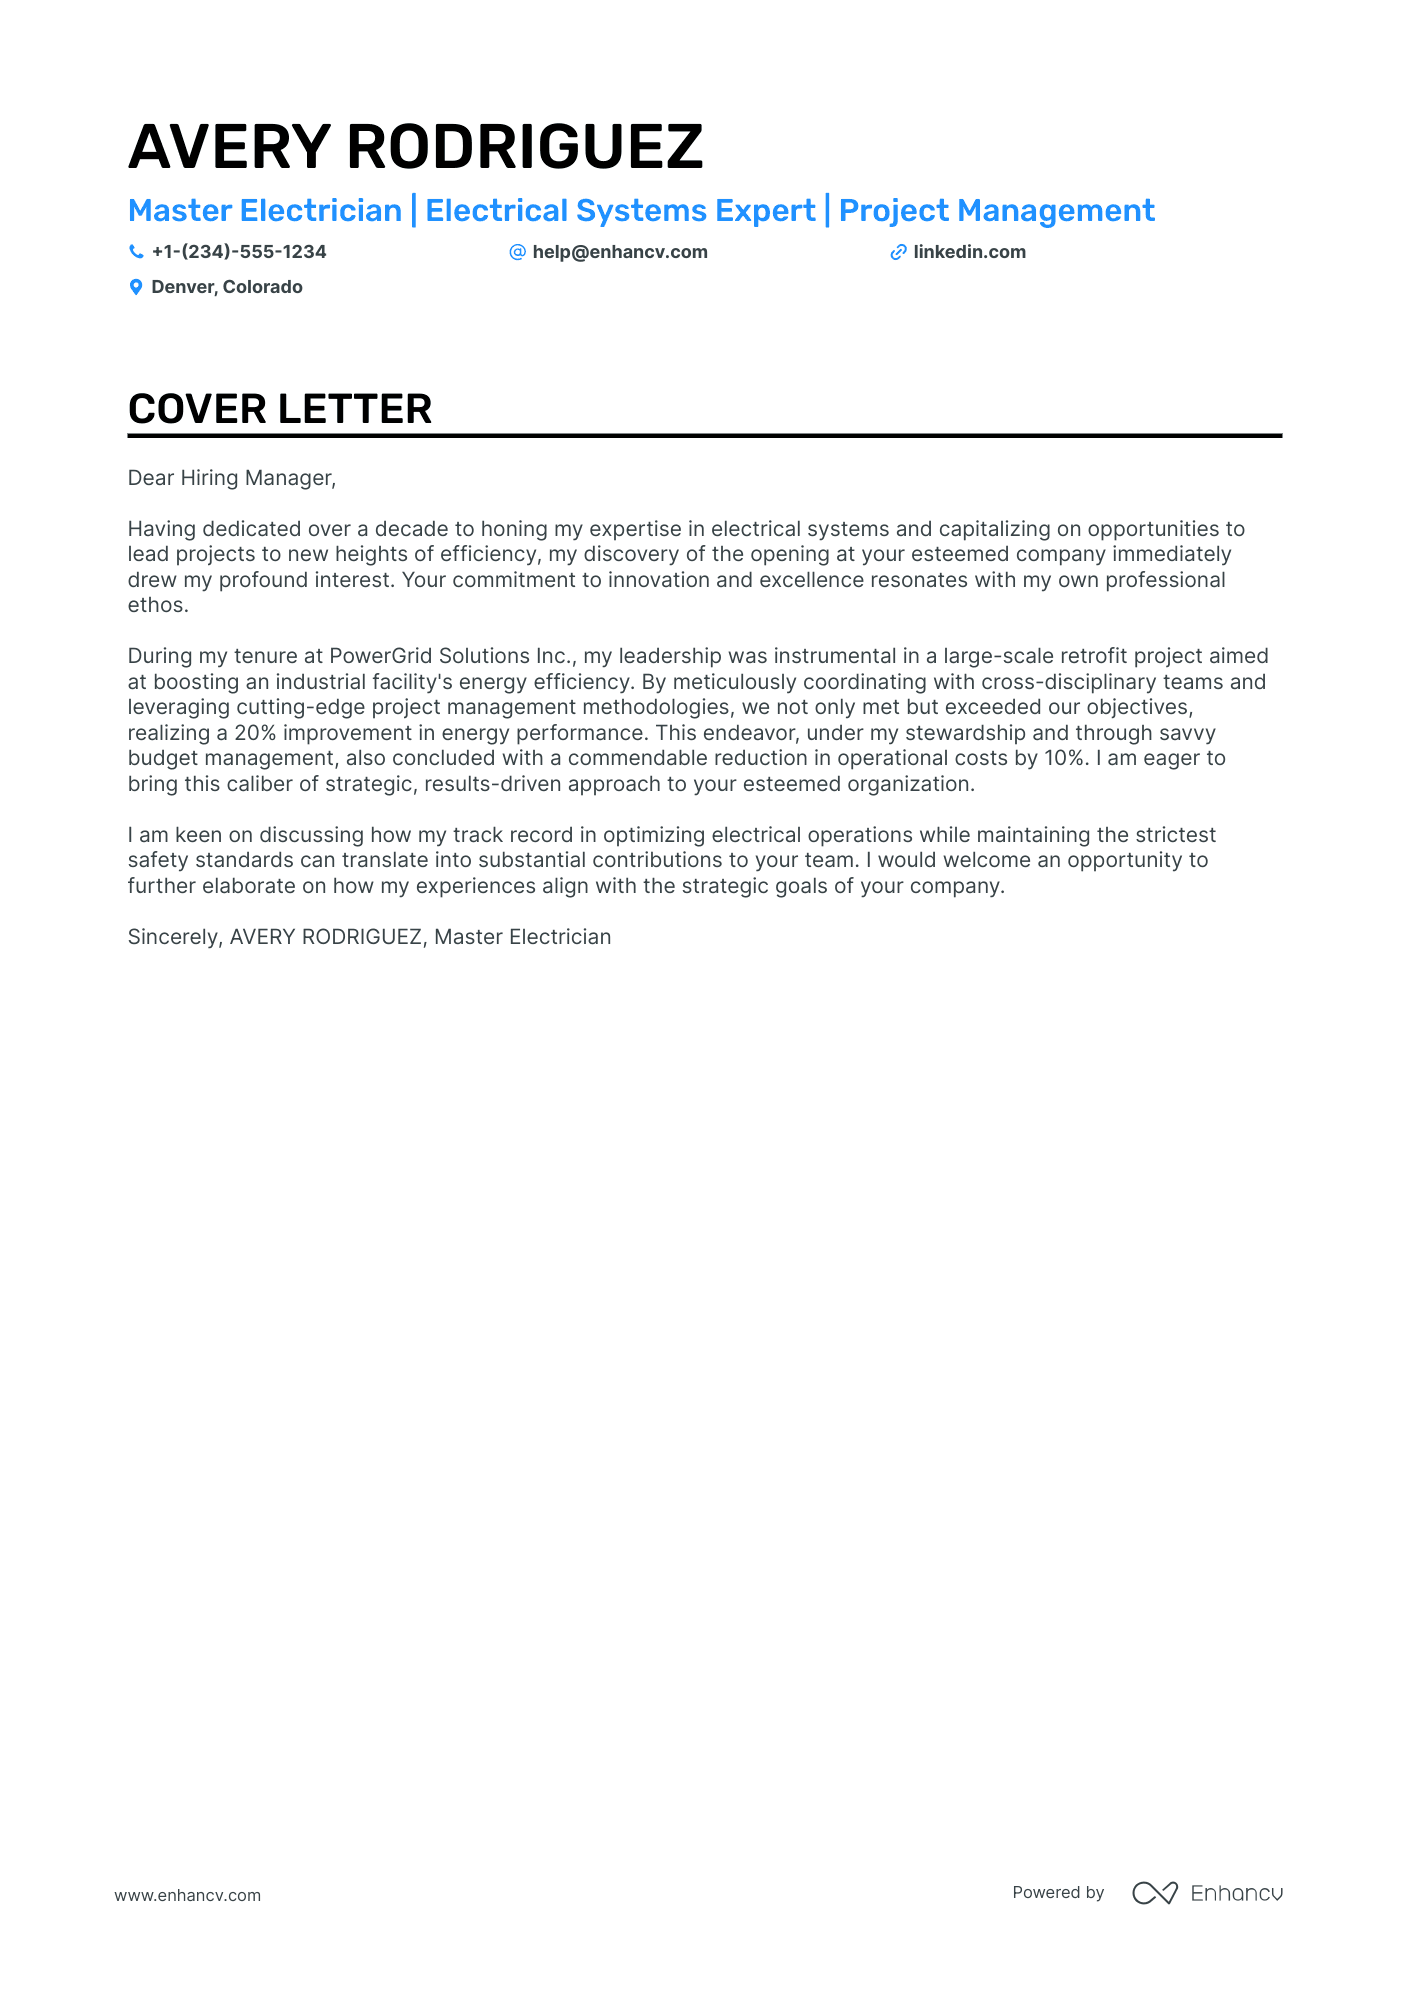 Electrical Manager cover letter